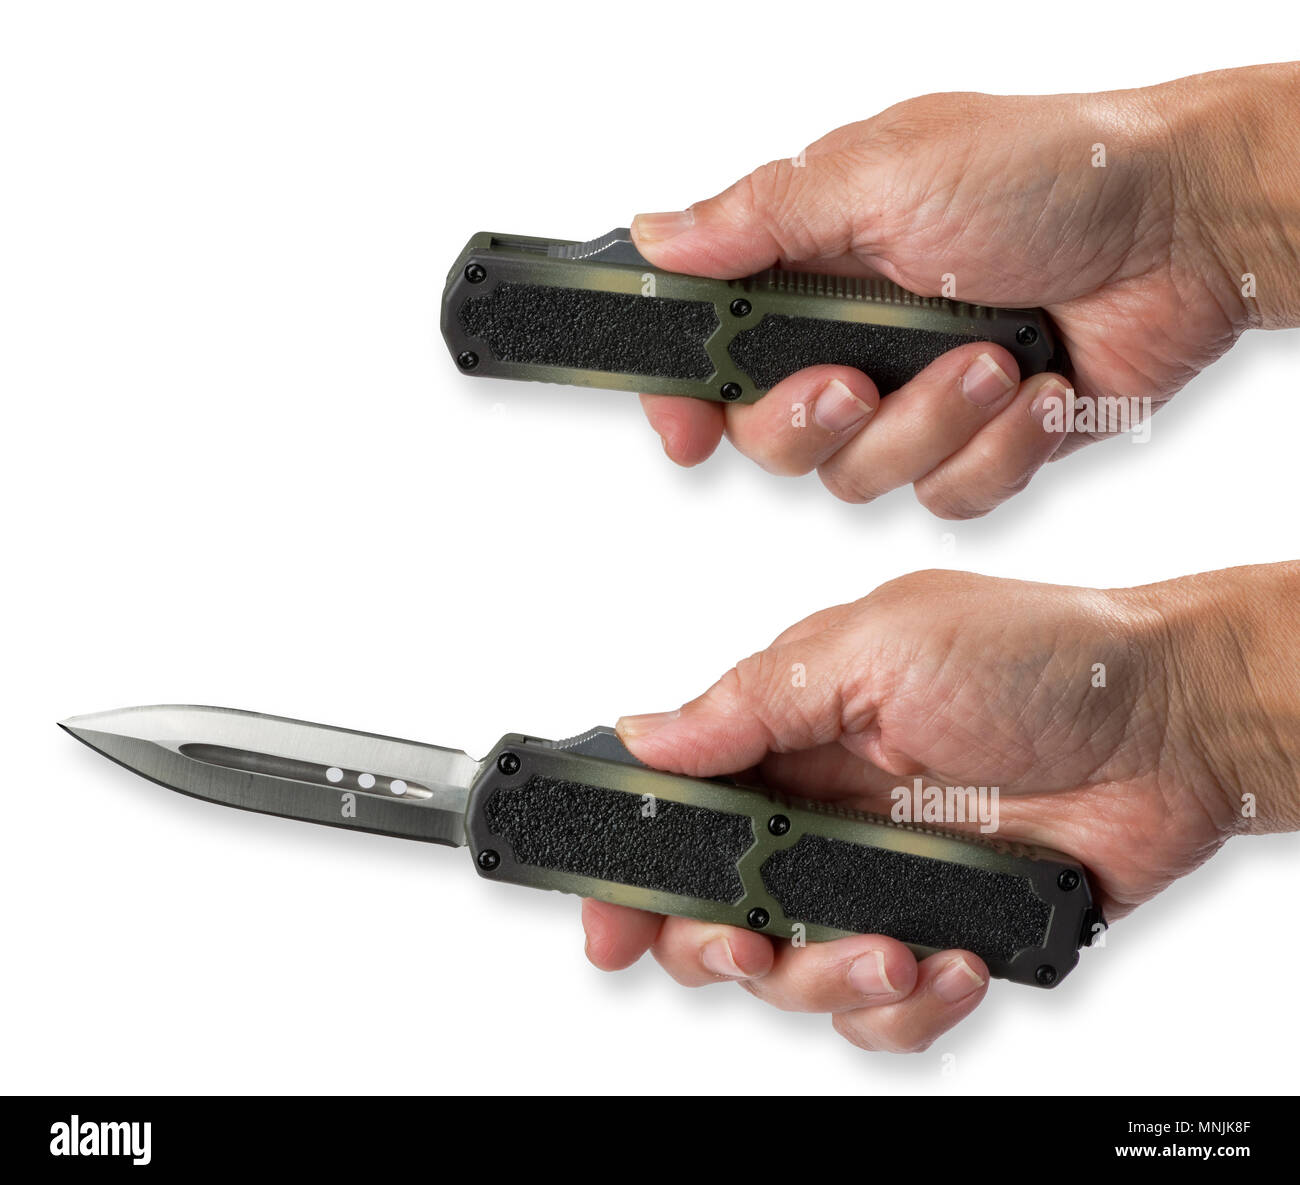 Automatic knife sometimes called a switchblade open with finger button. Stock Photo